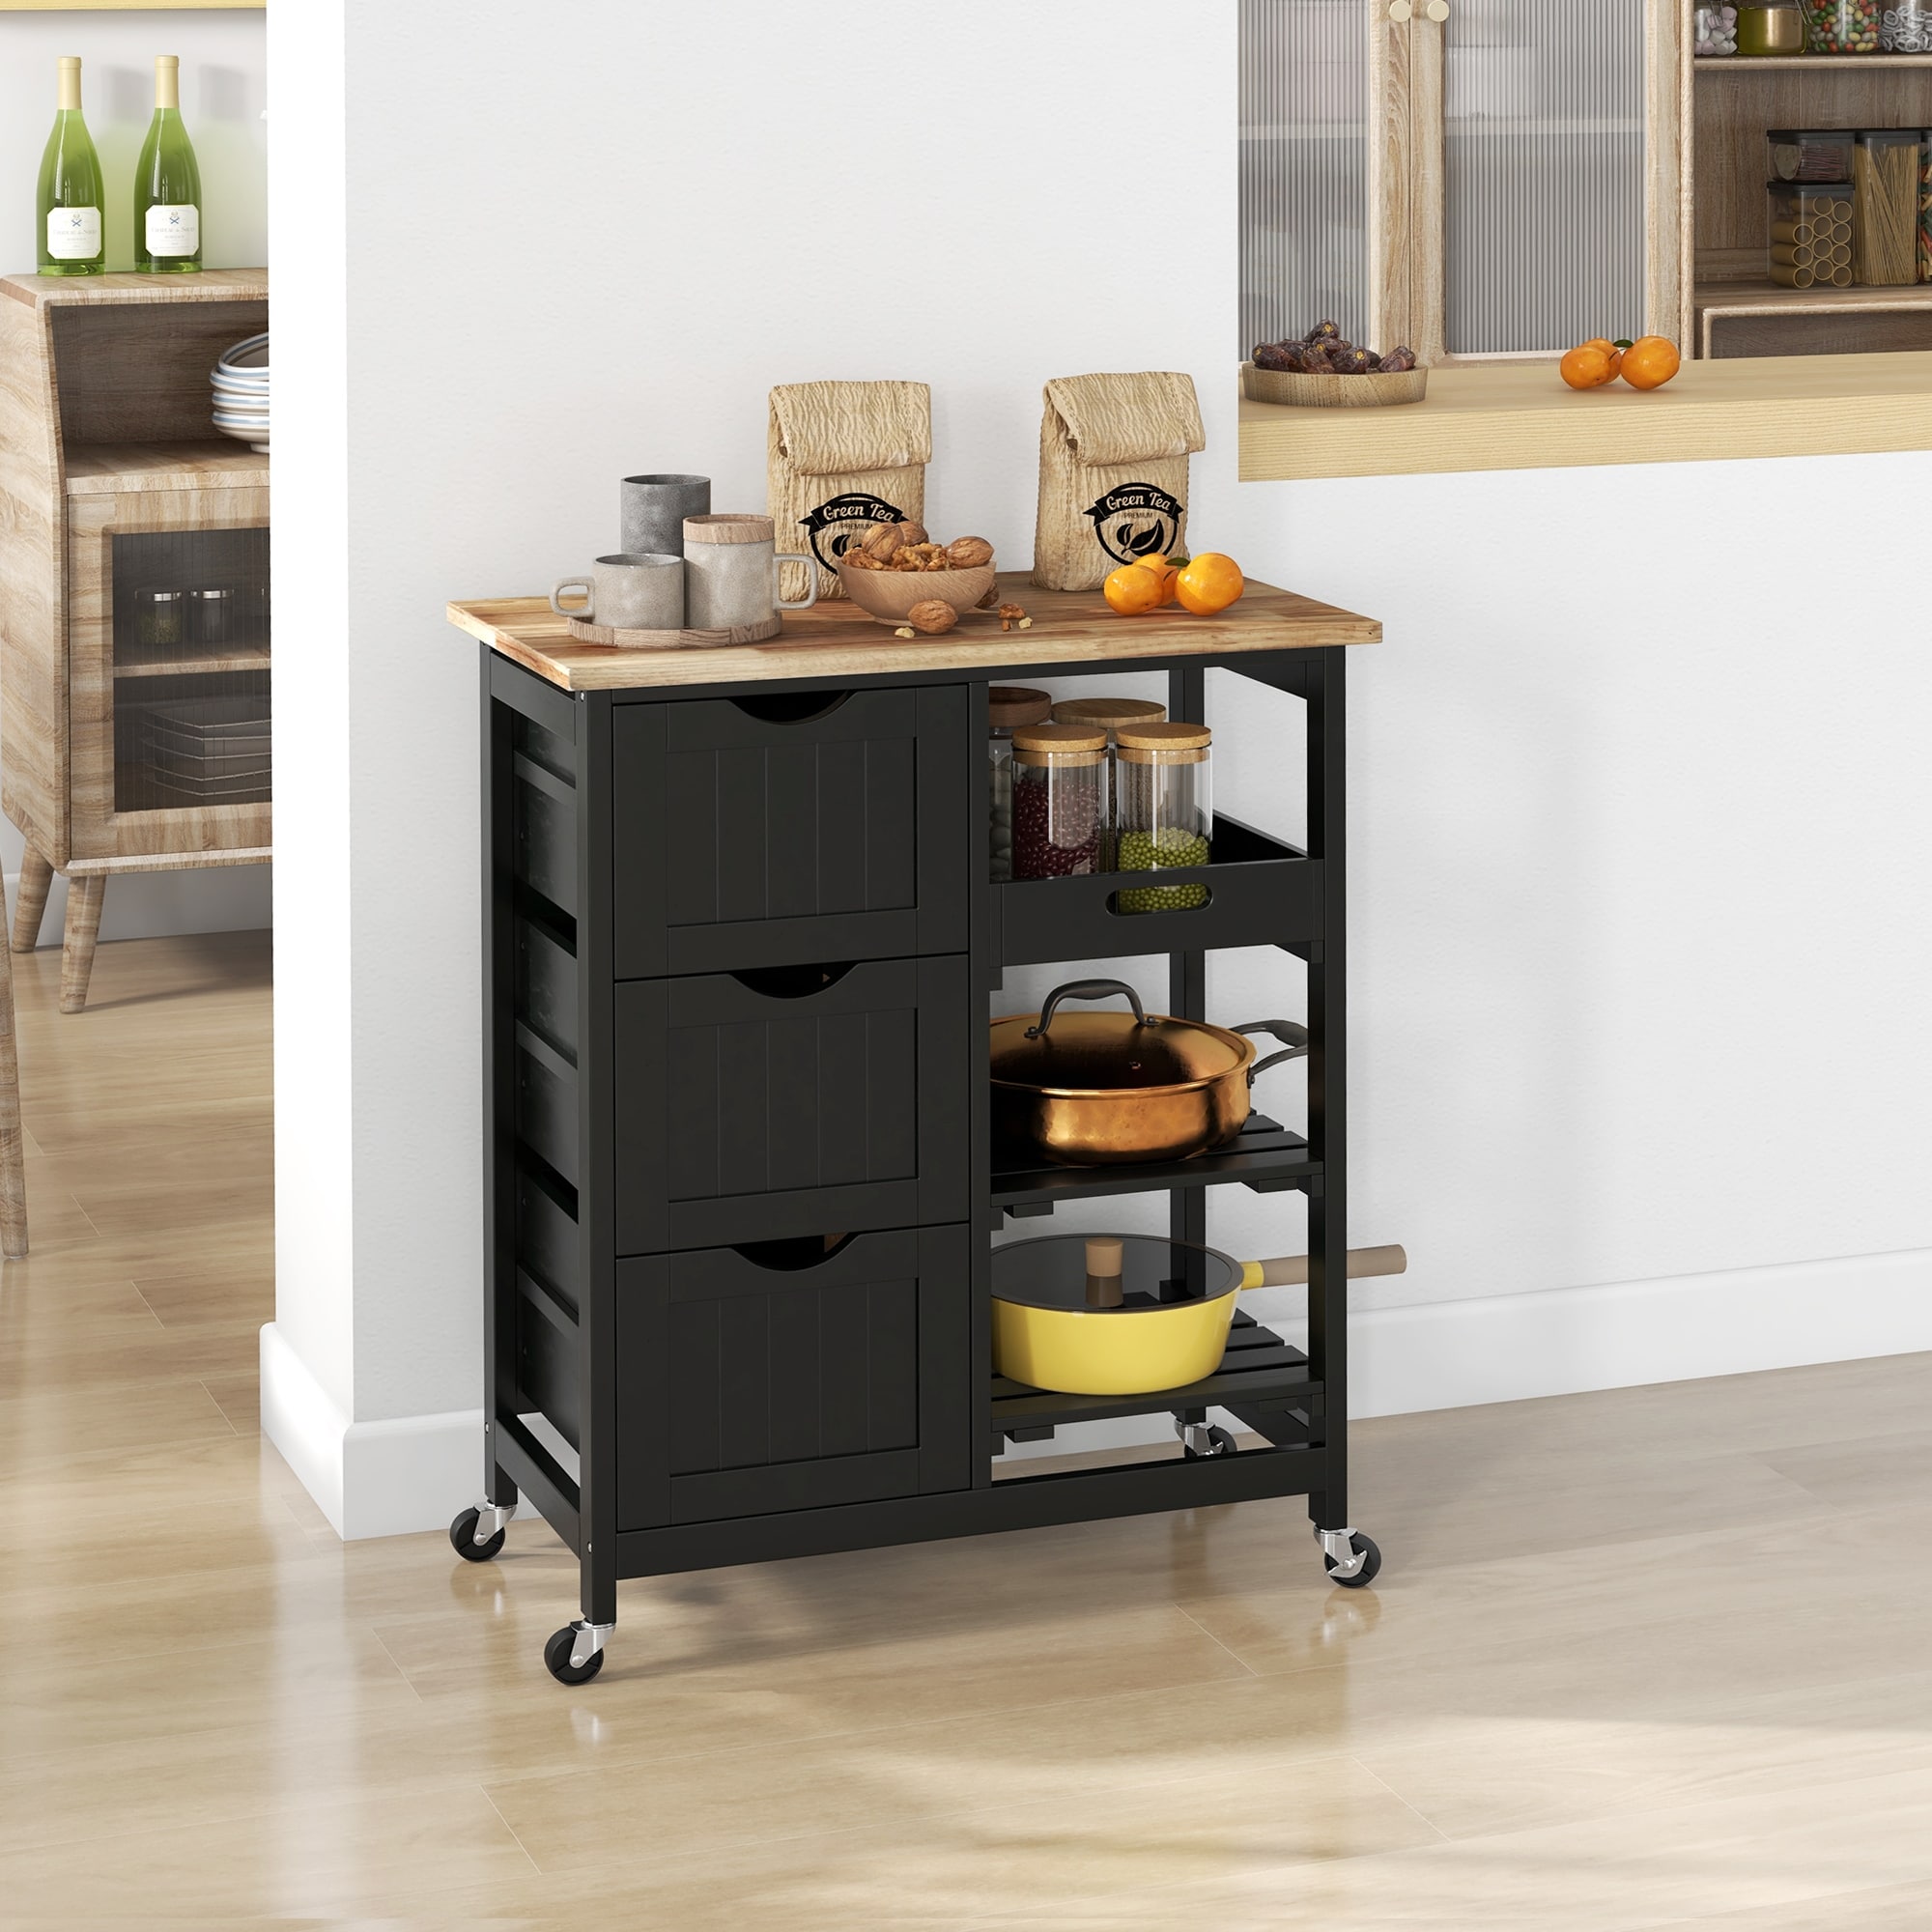 https://ak1.ostkcdn.com/images/products/is/images/direct/2c1dcfa0582c7175a53422a5165e4480a45aa996/HOMCOM-Rolling-Kitchen-Island-Cart%2C-Bar-Serving-Cart%2C-Compact-Trolley-on-Wheels-with-Wood-Top%2C-Shelves-%26-Drawers-for-Home-Dining.jpg